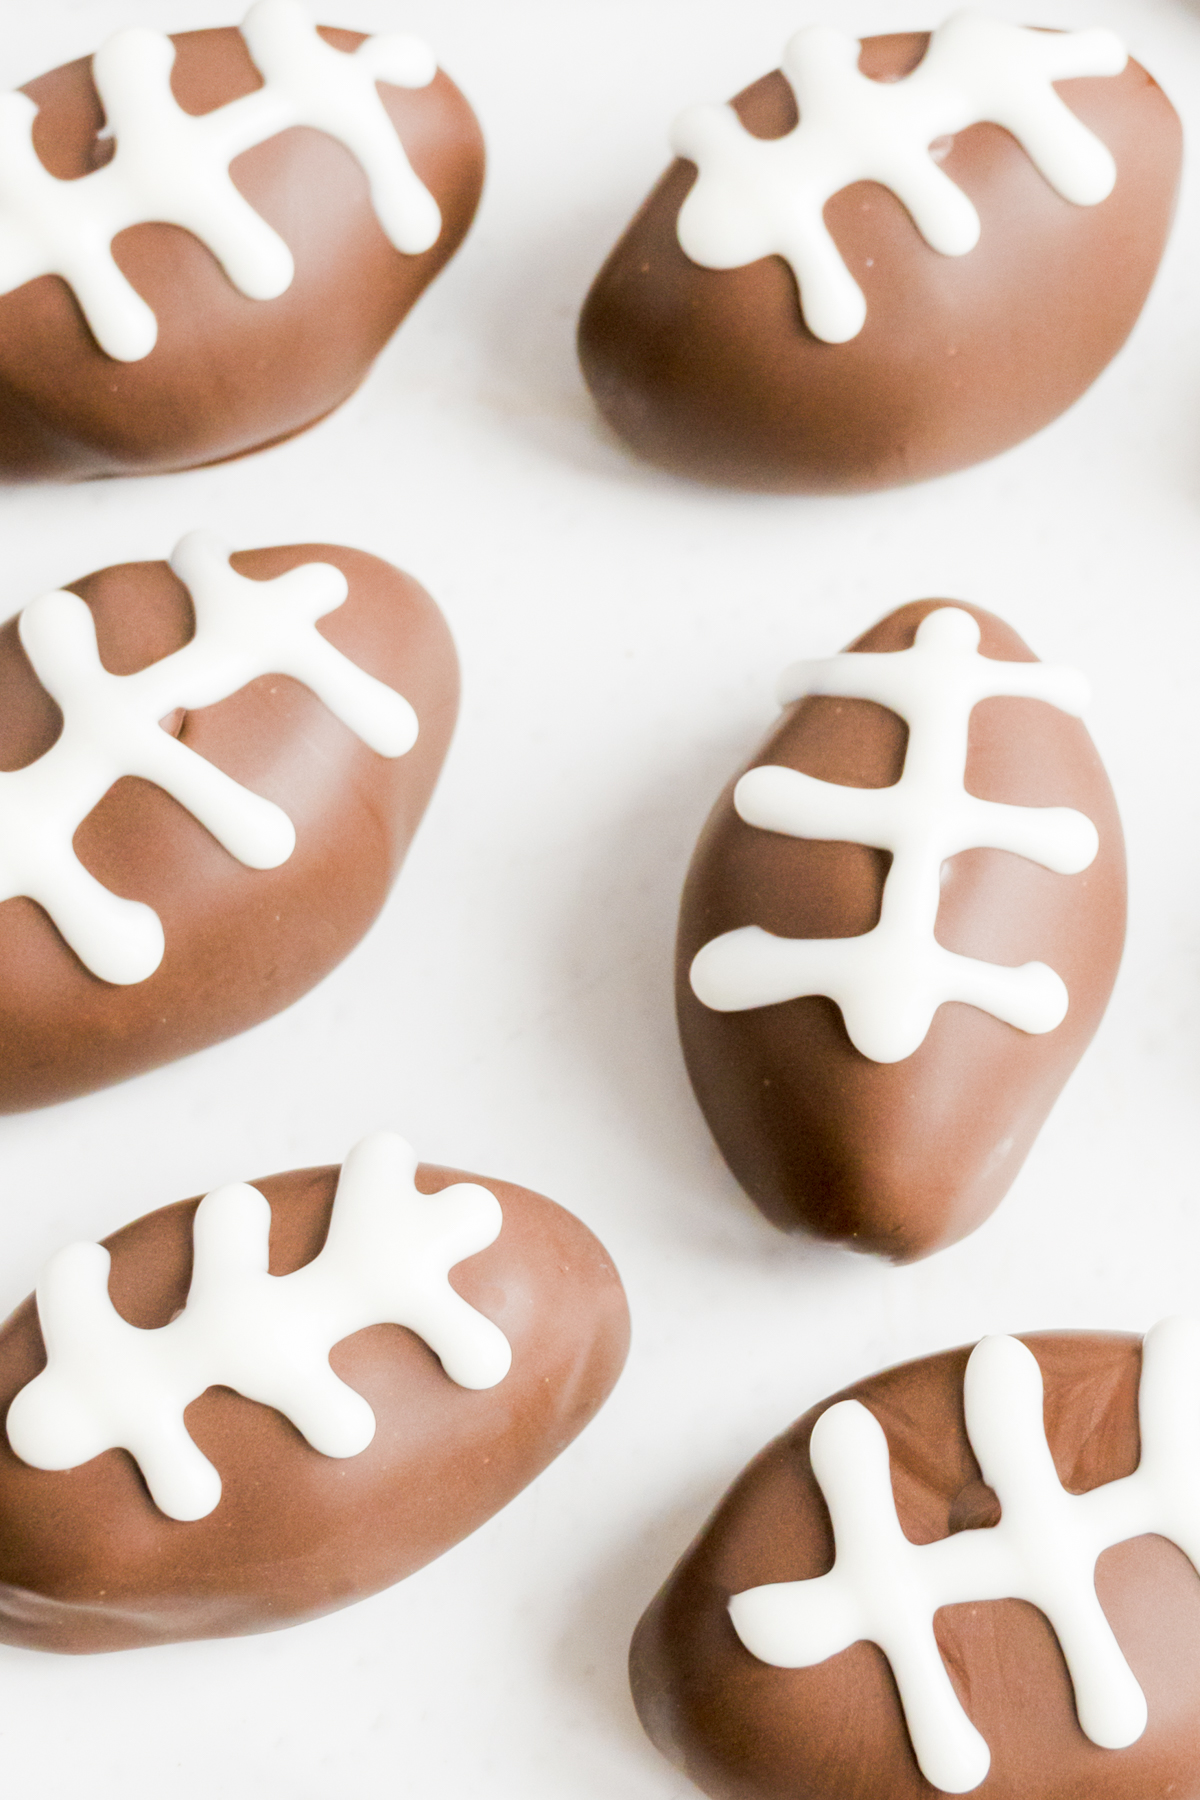 Peanut butter truffles shaped like footballs with white icing on a white surface.